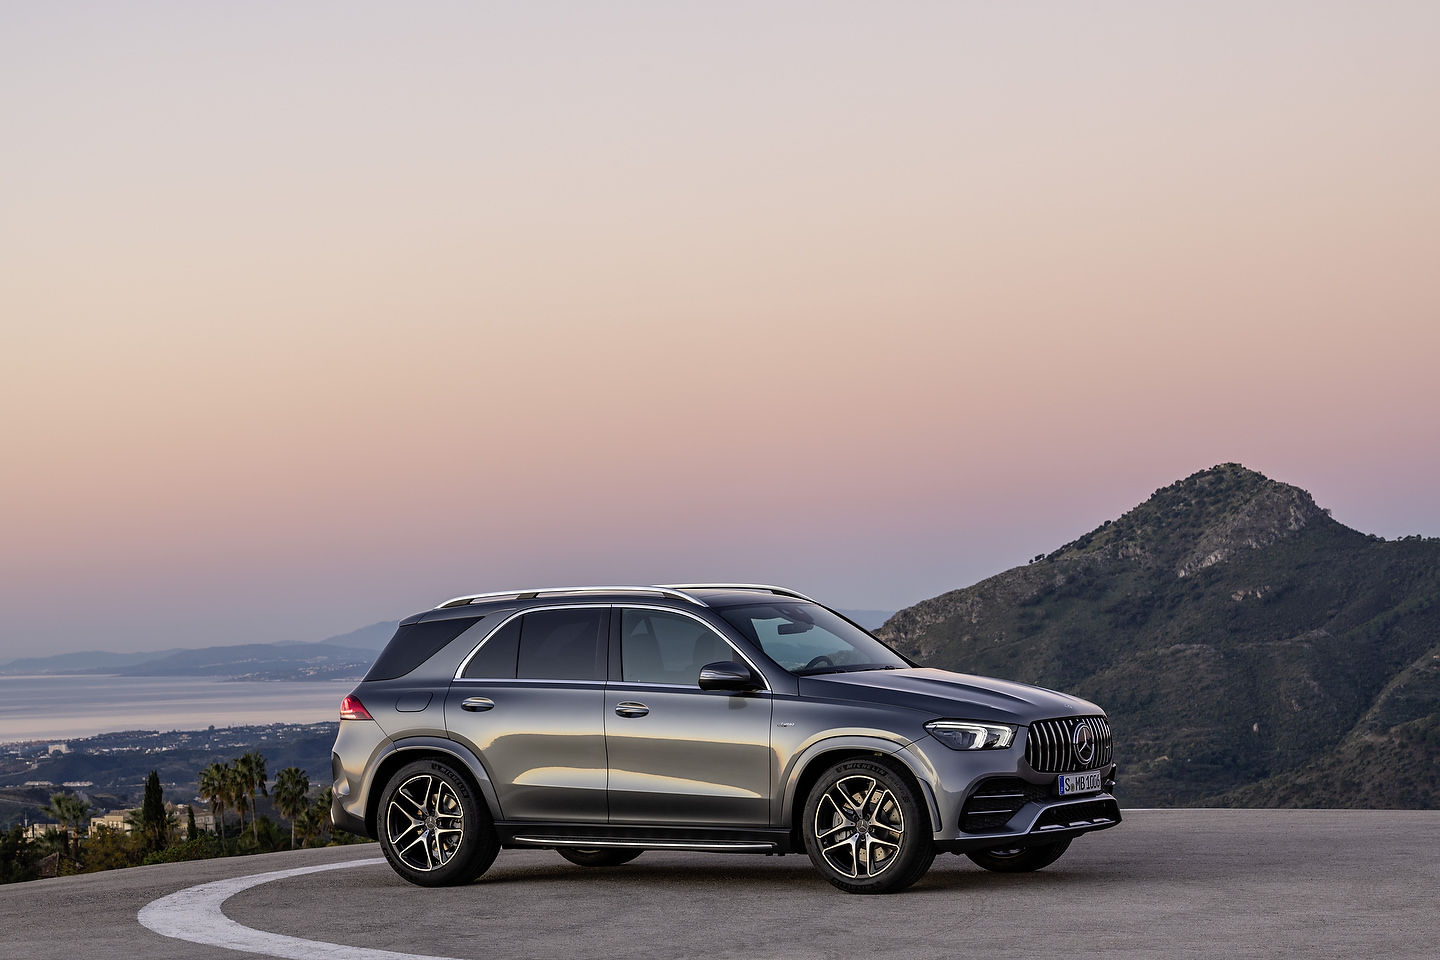 2021 Mercedes-Benz GLE vs. 2021 Audi Q7: More Tech and More Power